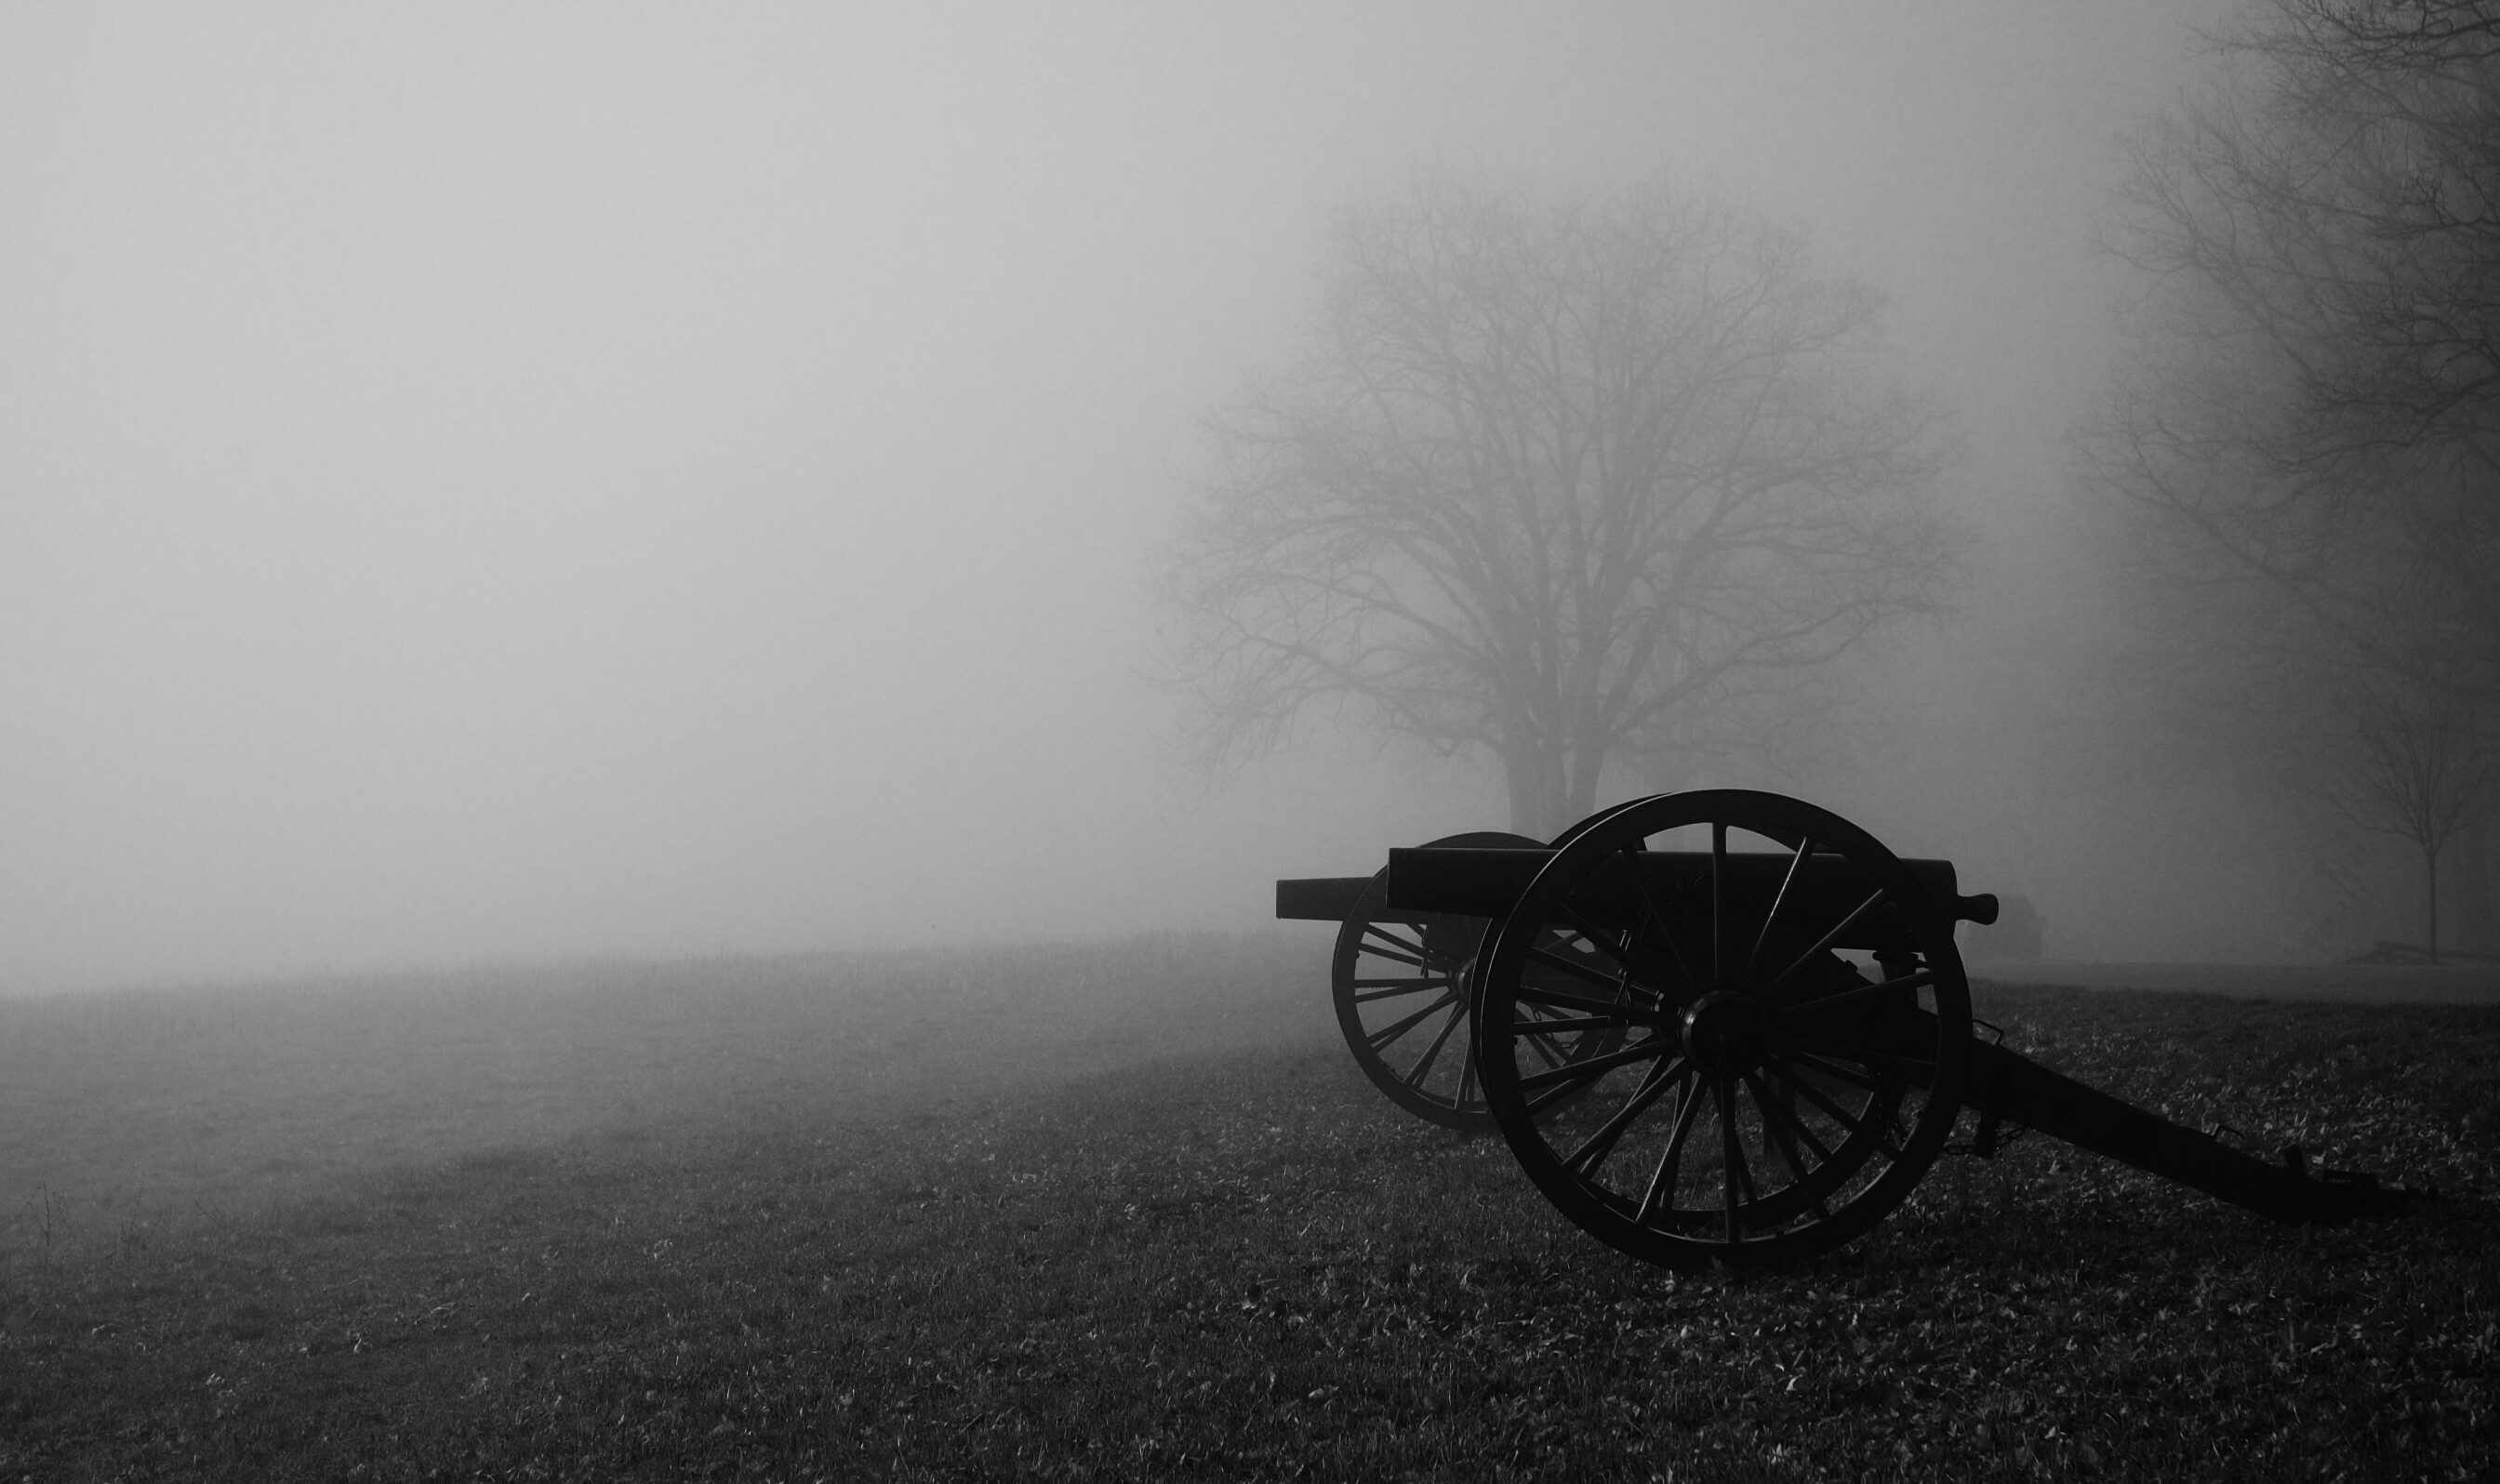 Gettysburg: Monochrome foggy cannons used by the infantry troops during the American Civil War. 2690x1600 HD Wallpaper.